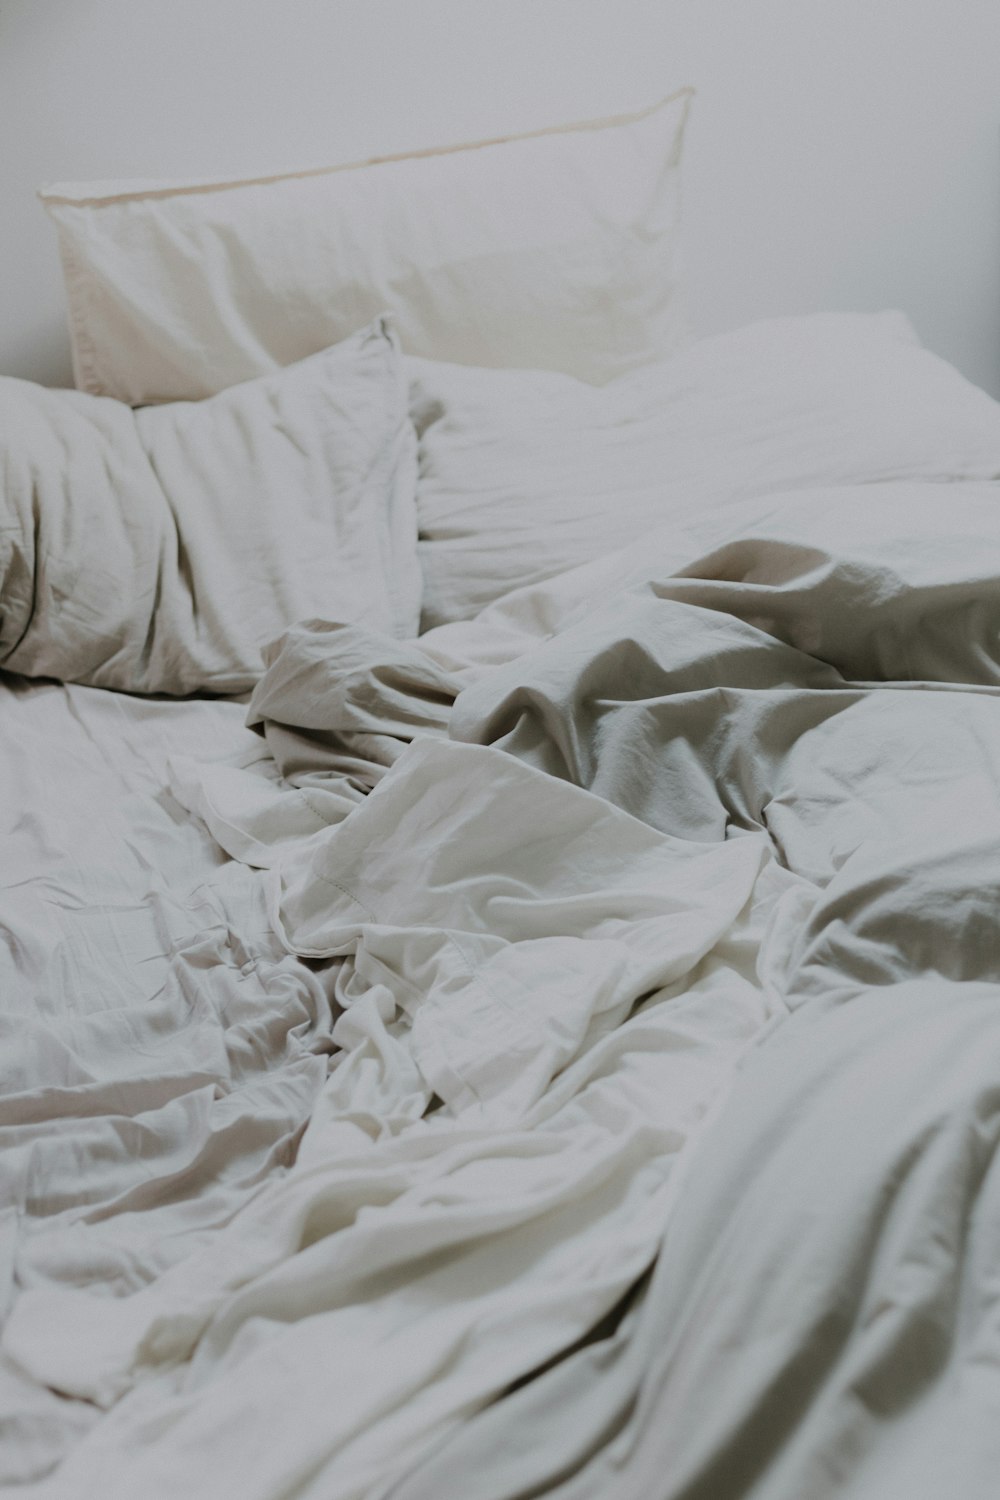 white pillows and bed comforter